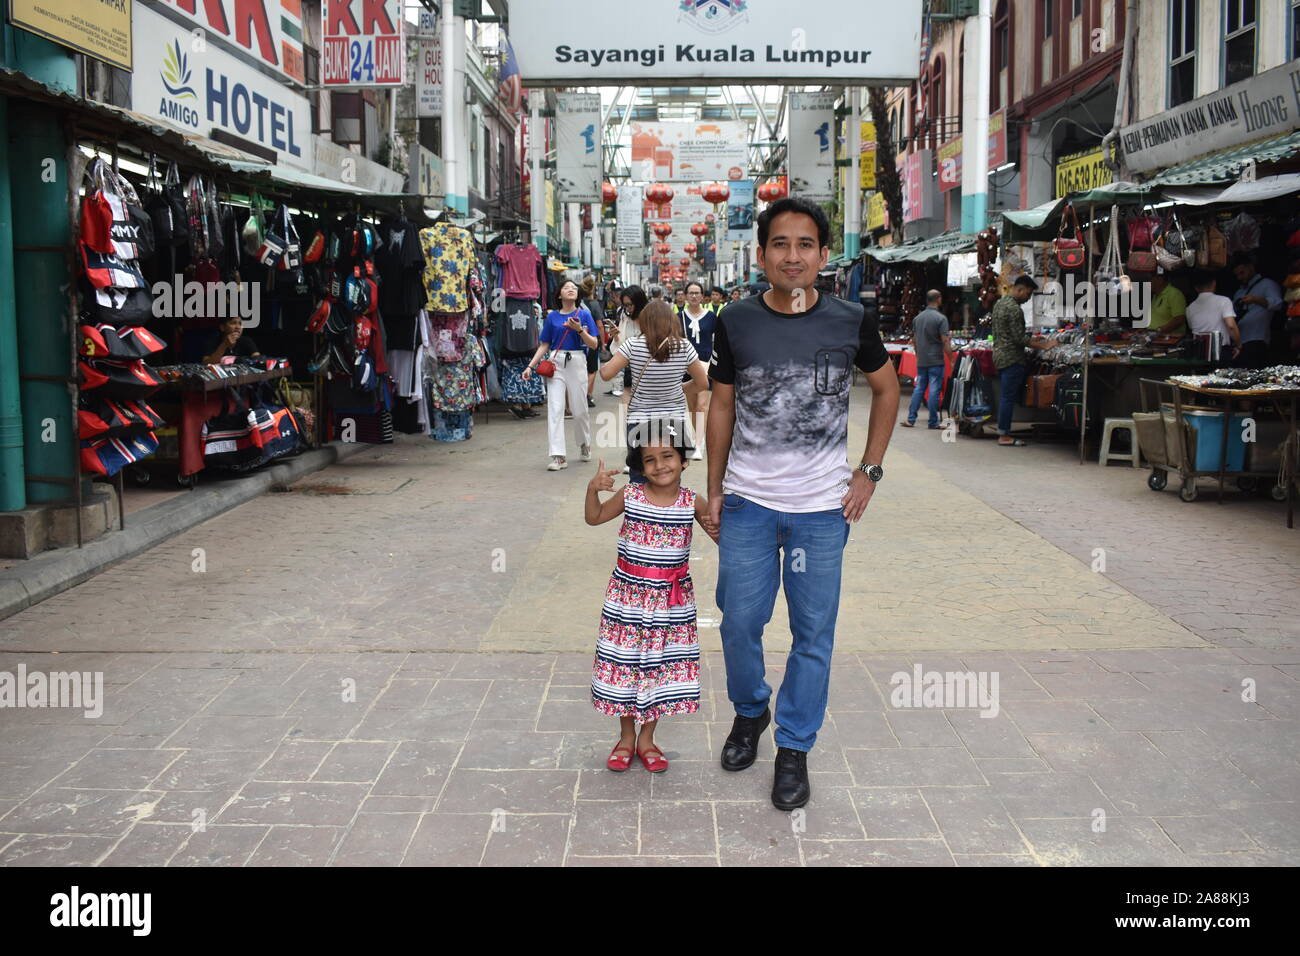 A man wearing jeans and t-shirt, with his daughter walking on empty road of a china town of Kuala Lumpur, Malaysia Stock Photo